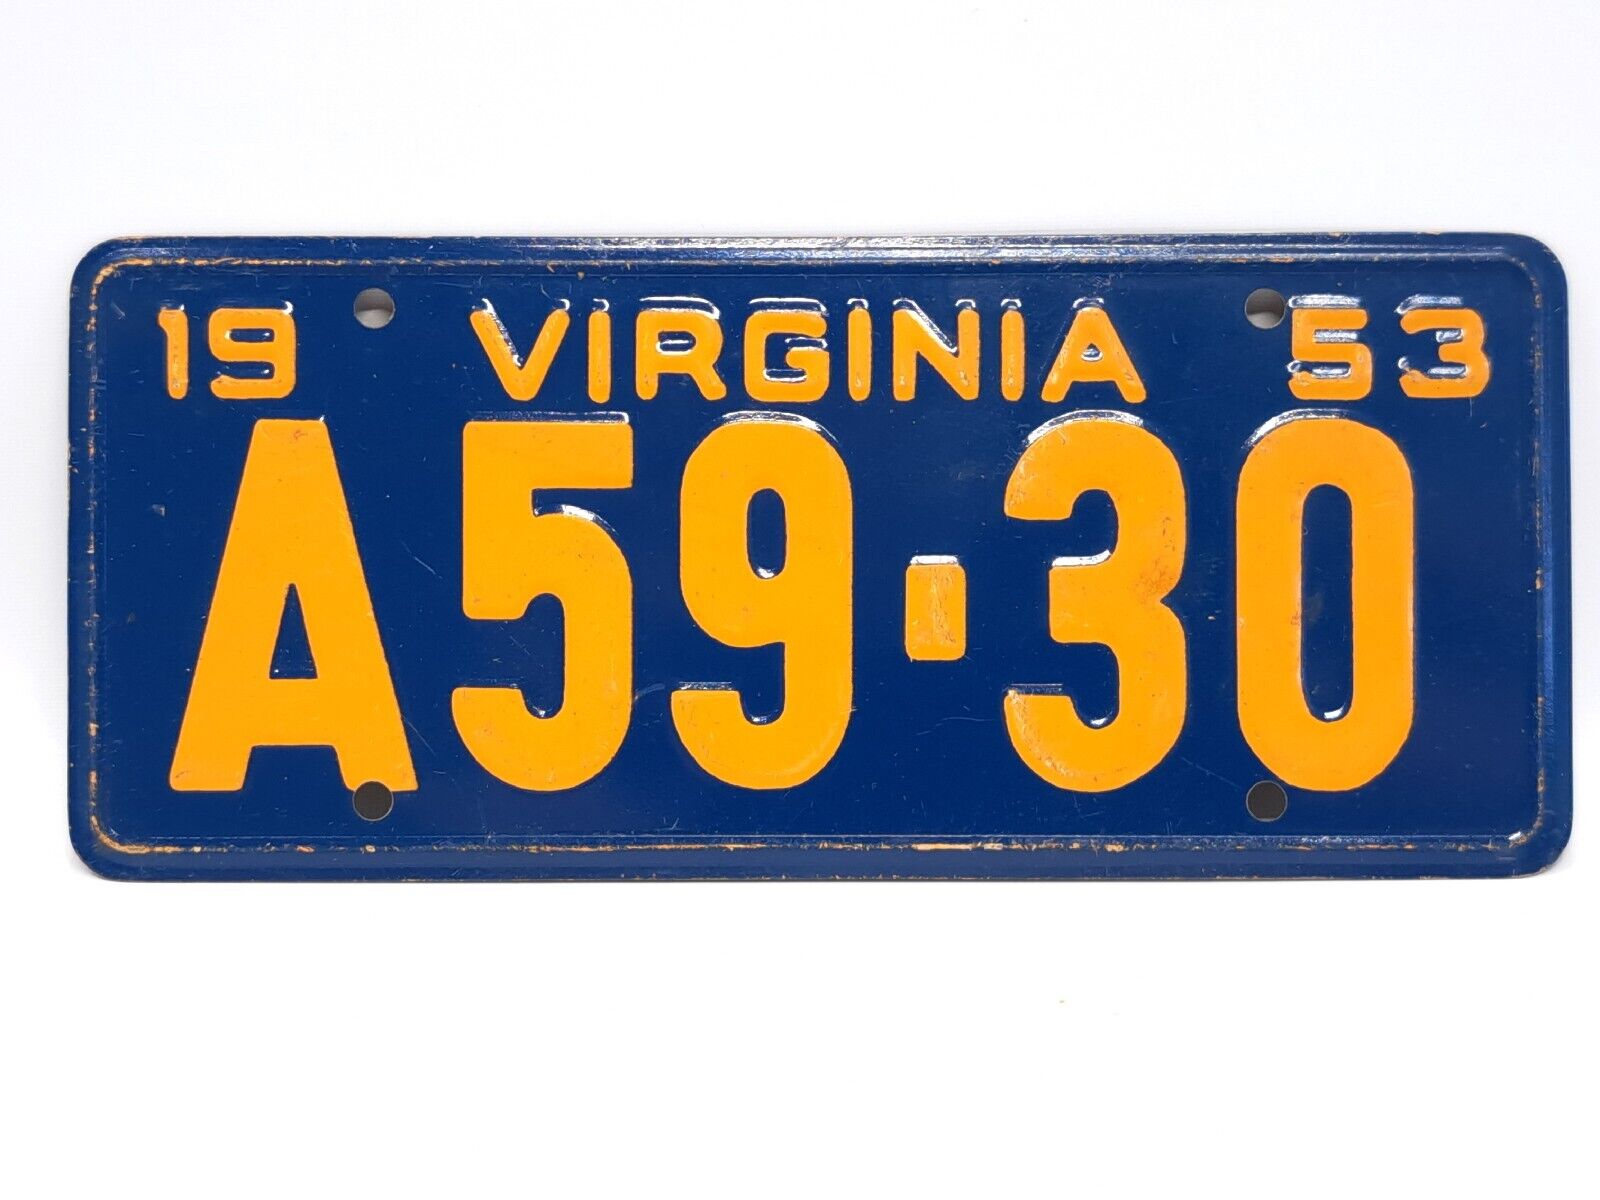 VTG 1953 VIRGINIA GENERAL MILLS WHEATIES CEREAL MINI AUTO BICYCLE LICENSE PLATE